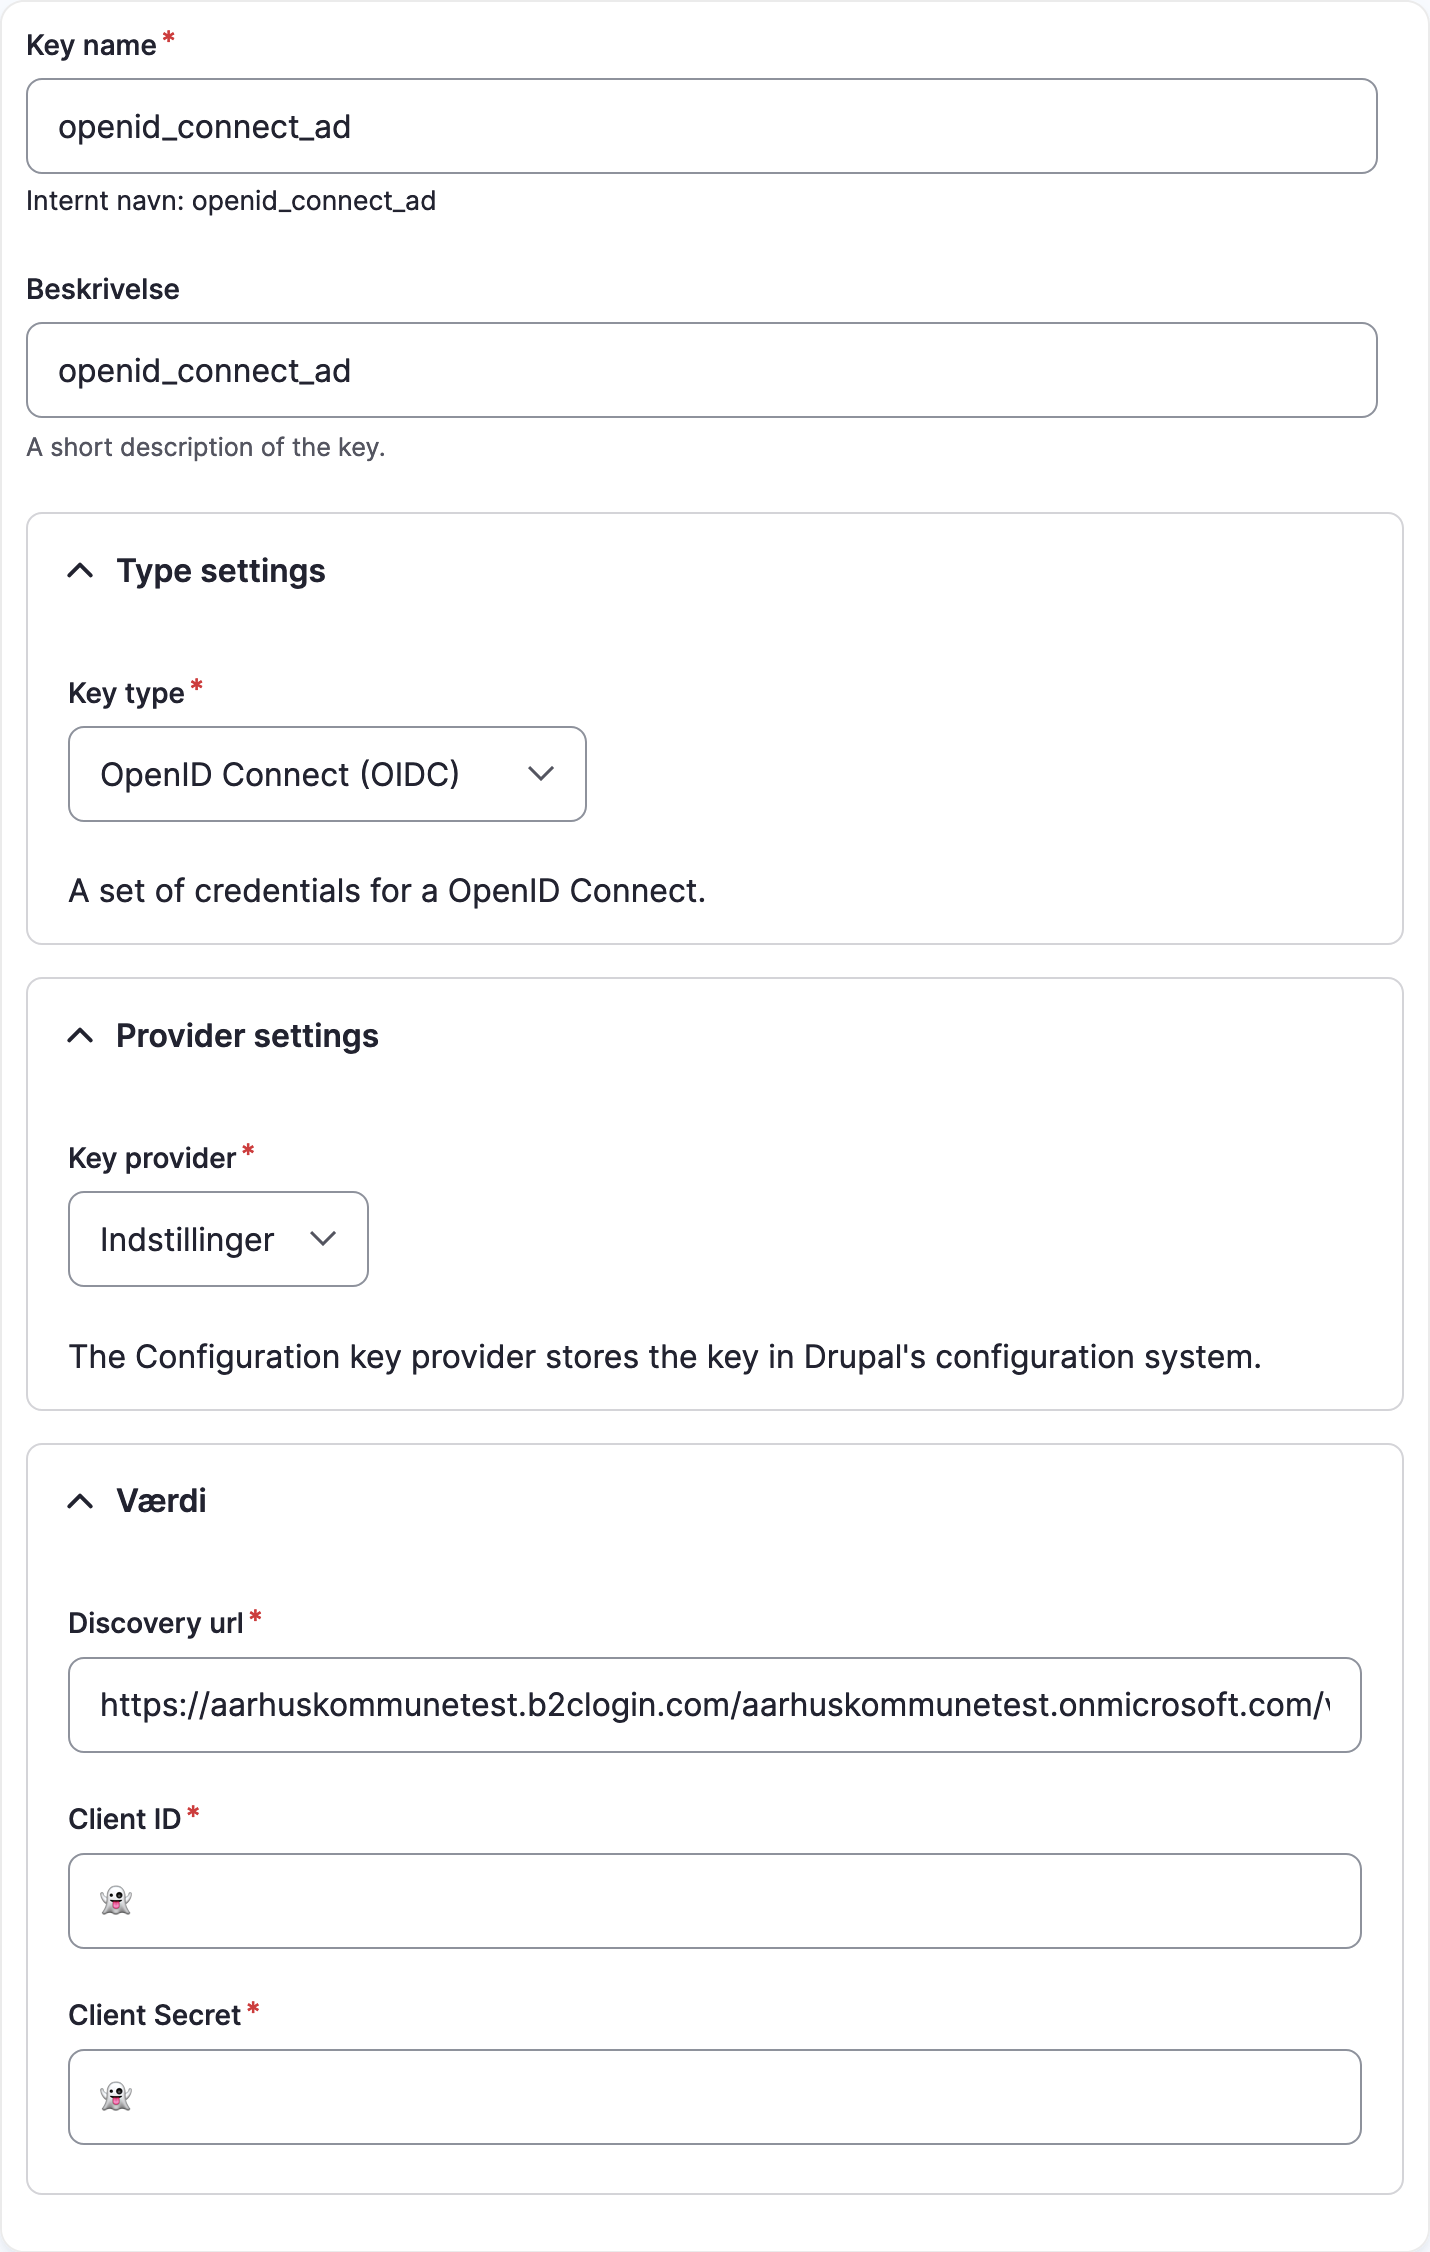 "OpenID Connect (OIDC)" key type form